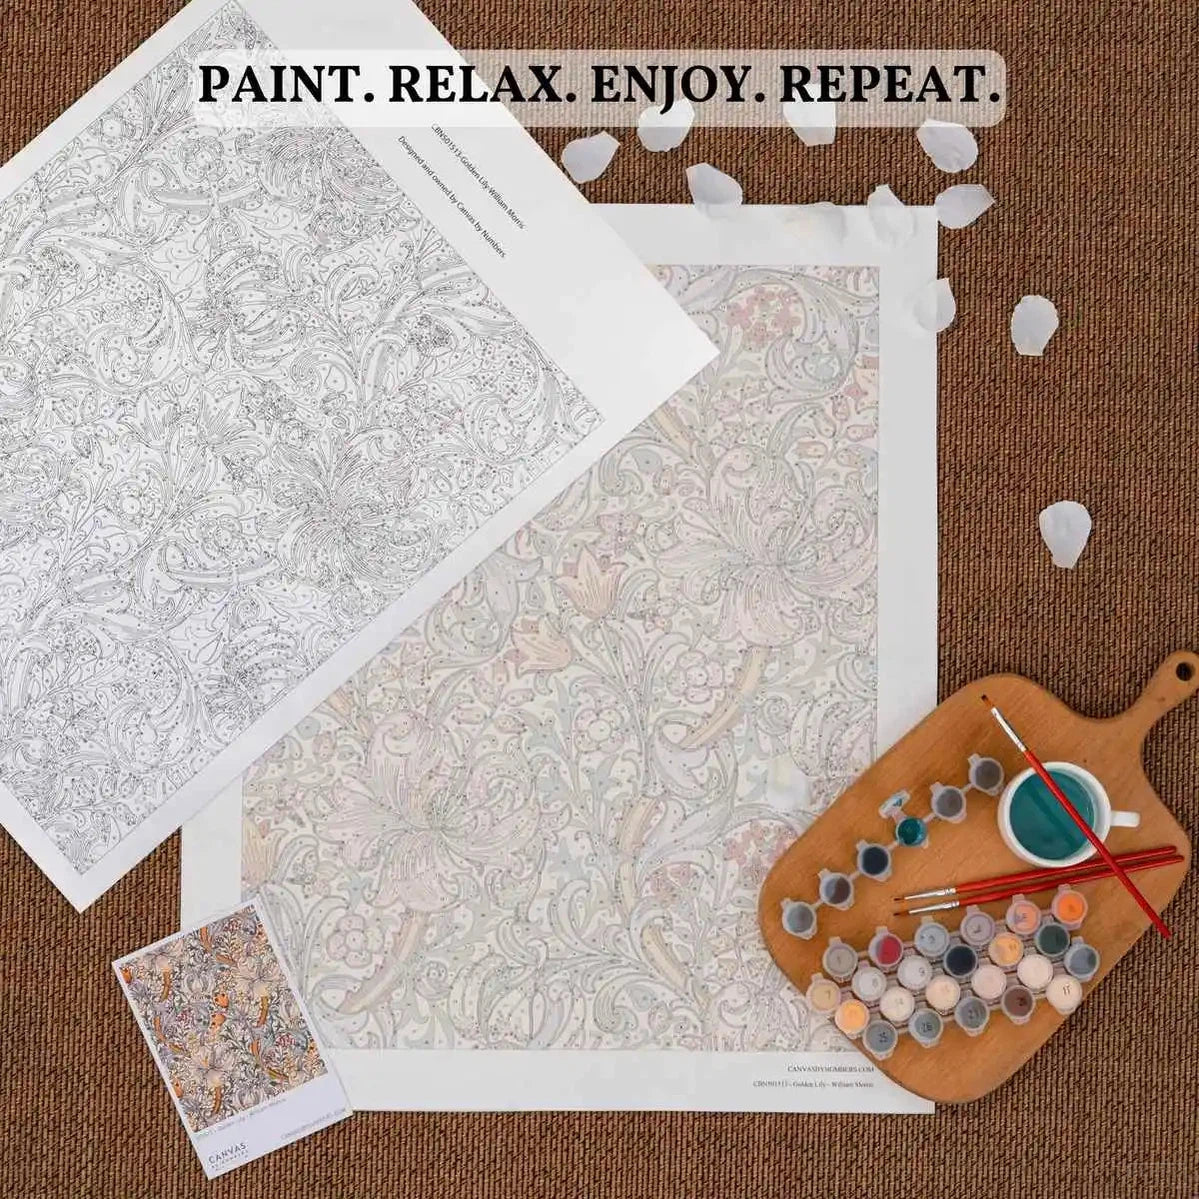 The Royal Duchy - Paint by Numbers-You'll love our The Royal Duchy - Howard Fogg paint by numbers kit. Up to 50% Off! Free shipping and 60 days money-back.Shop at Canvas by Numbers.-Canvas by Numbers